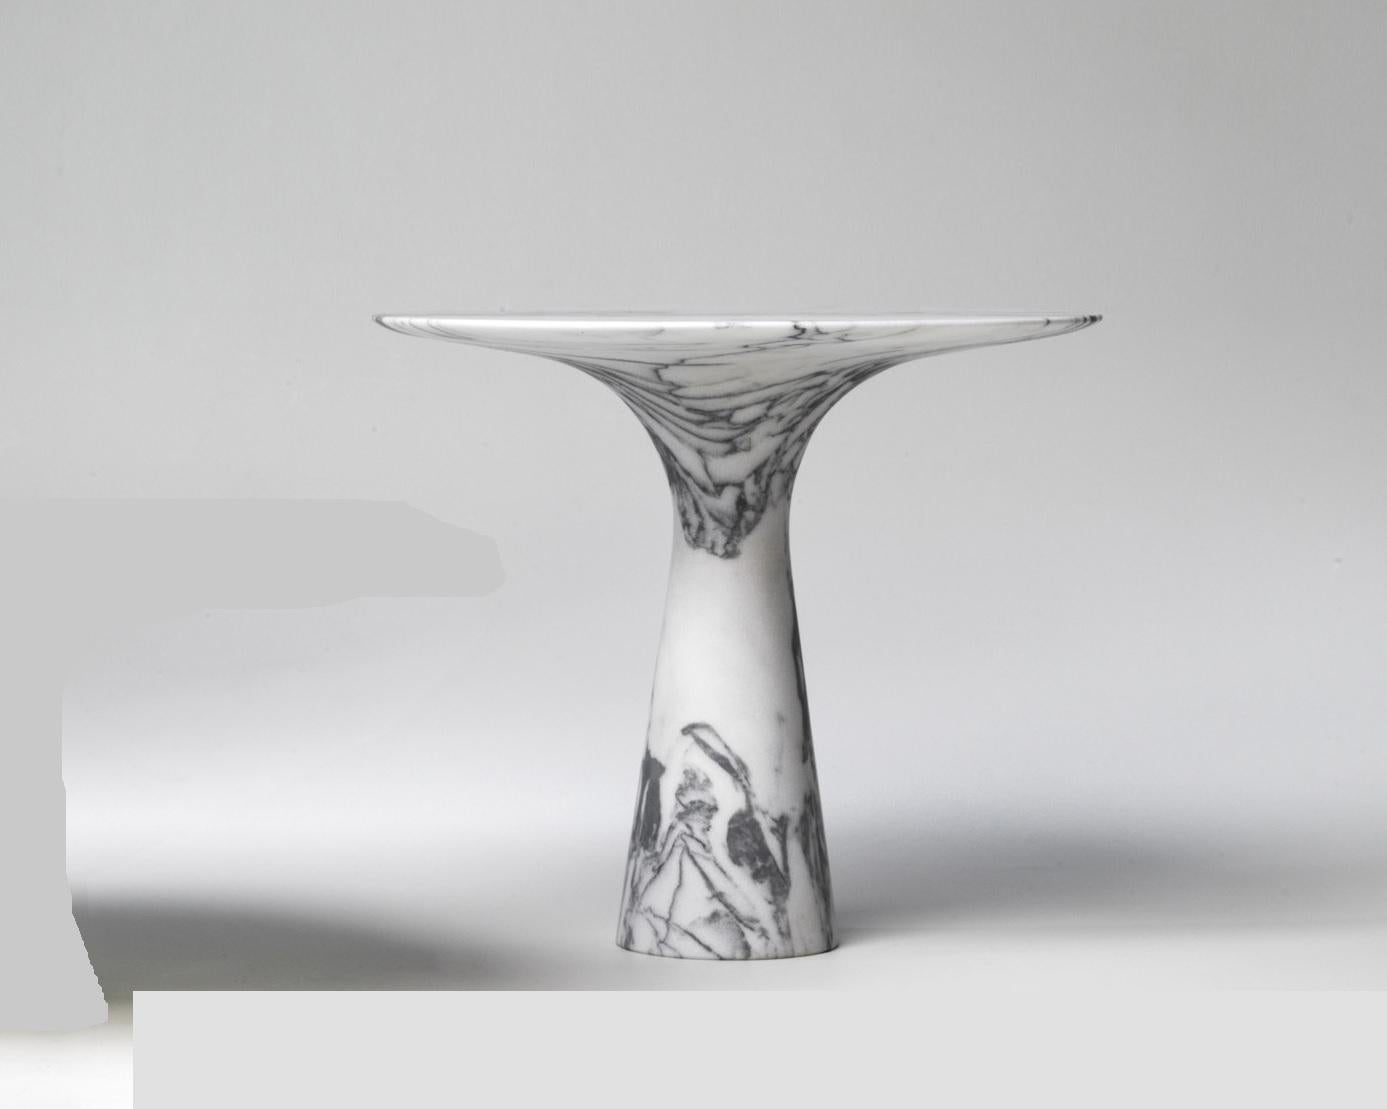 Refined Contemporary Marble 03 Bianco Statuarietto Marble Cake Stand
Signed by Leo Aerts.
Dimensions: Diameter 26 x H 22.5 cm 
Material: Bianco Statuarietto Marble
Technique: Polished, Carved. 
Available in Marble: Kyknos, Bianco Statuarietto, Grey